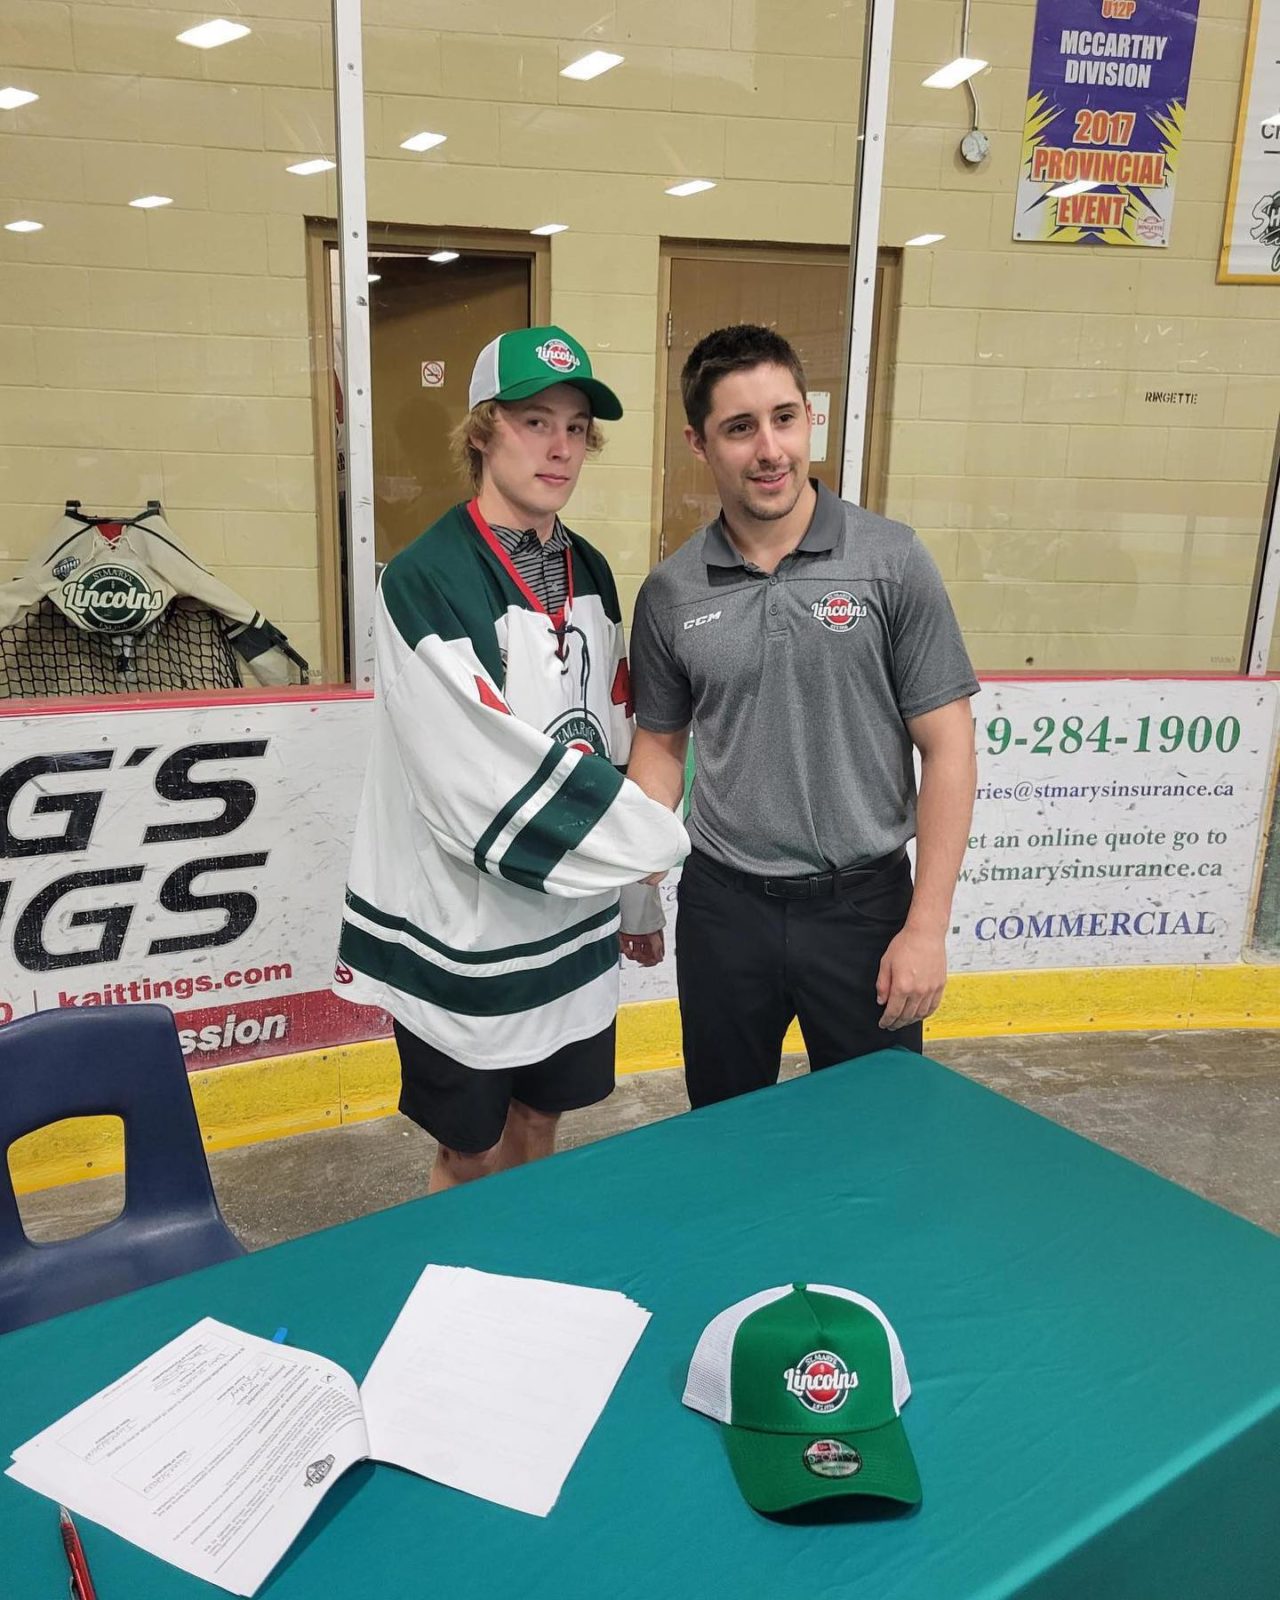 SIGNED - Lincs have locked in Stonetown resident, Jimmy Schiedel!  Jimmy lead the U18 AAA Lakers in points last season, and also AP’d with the Lincs! Welcome to the Lincs, Jimmy #WeAreLincolns